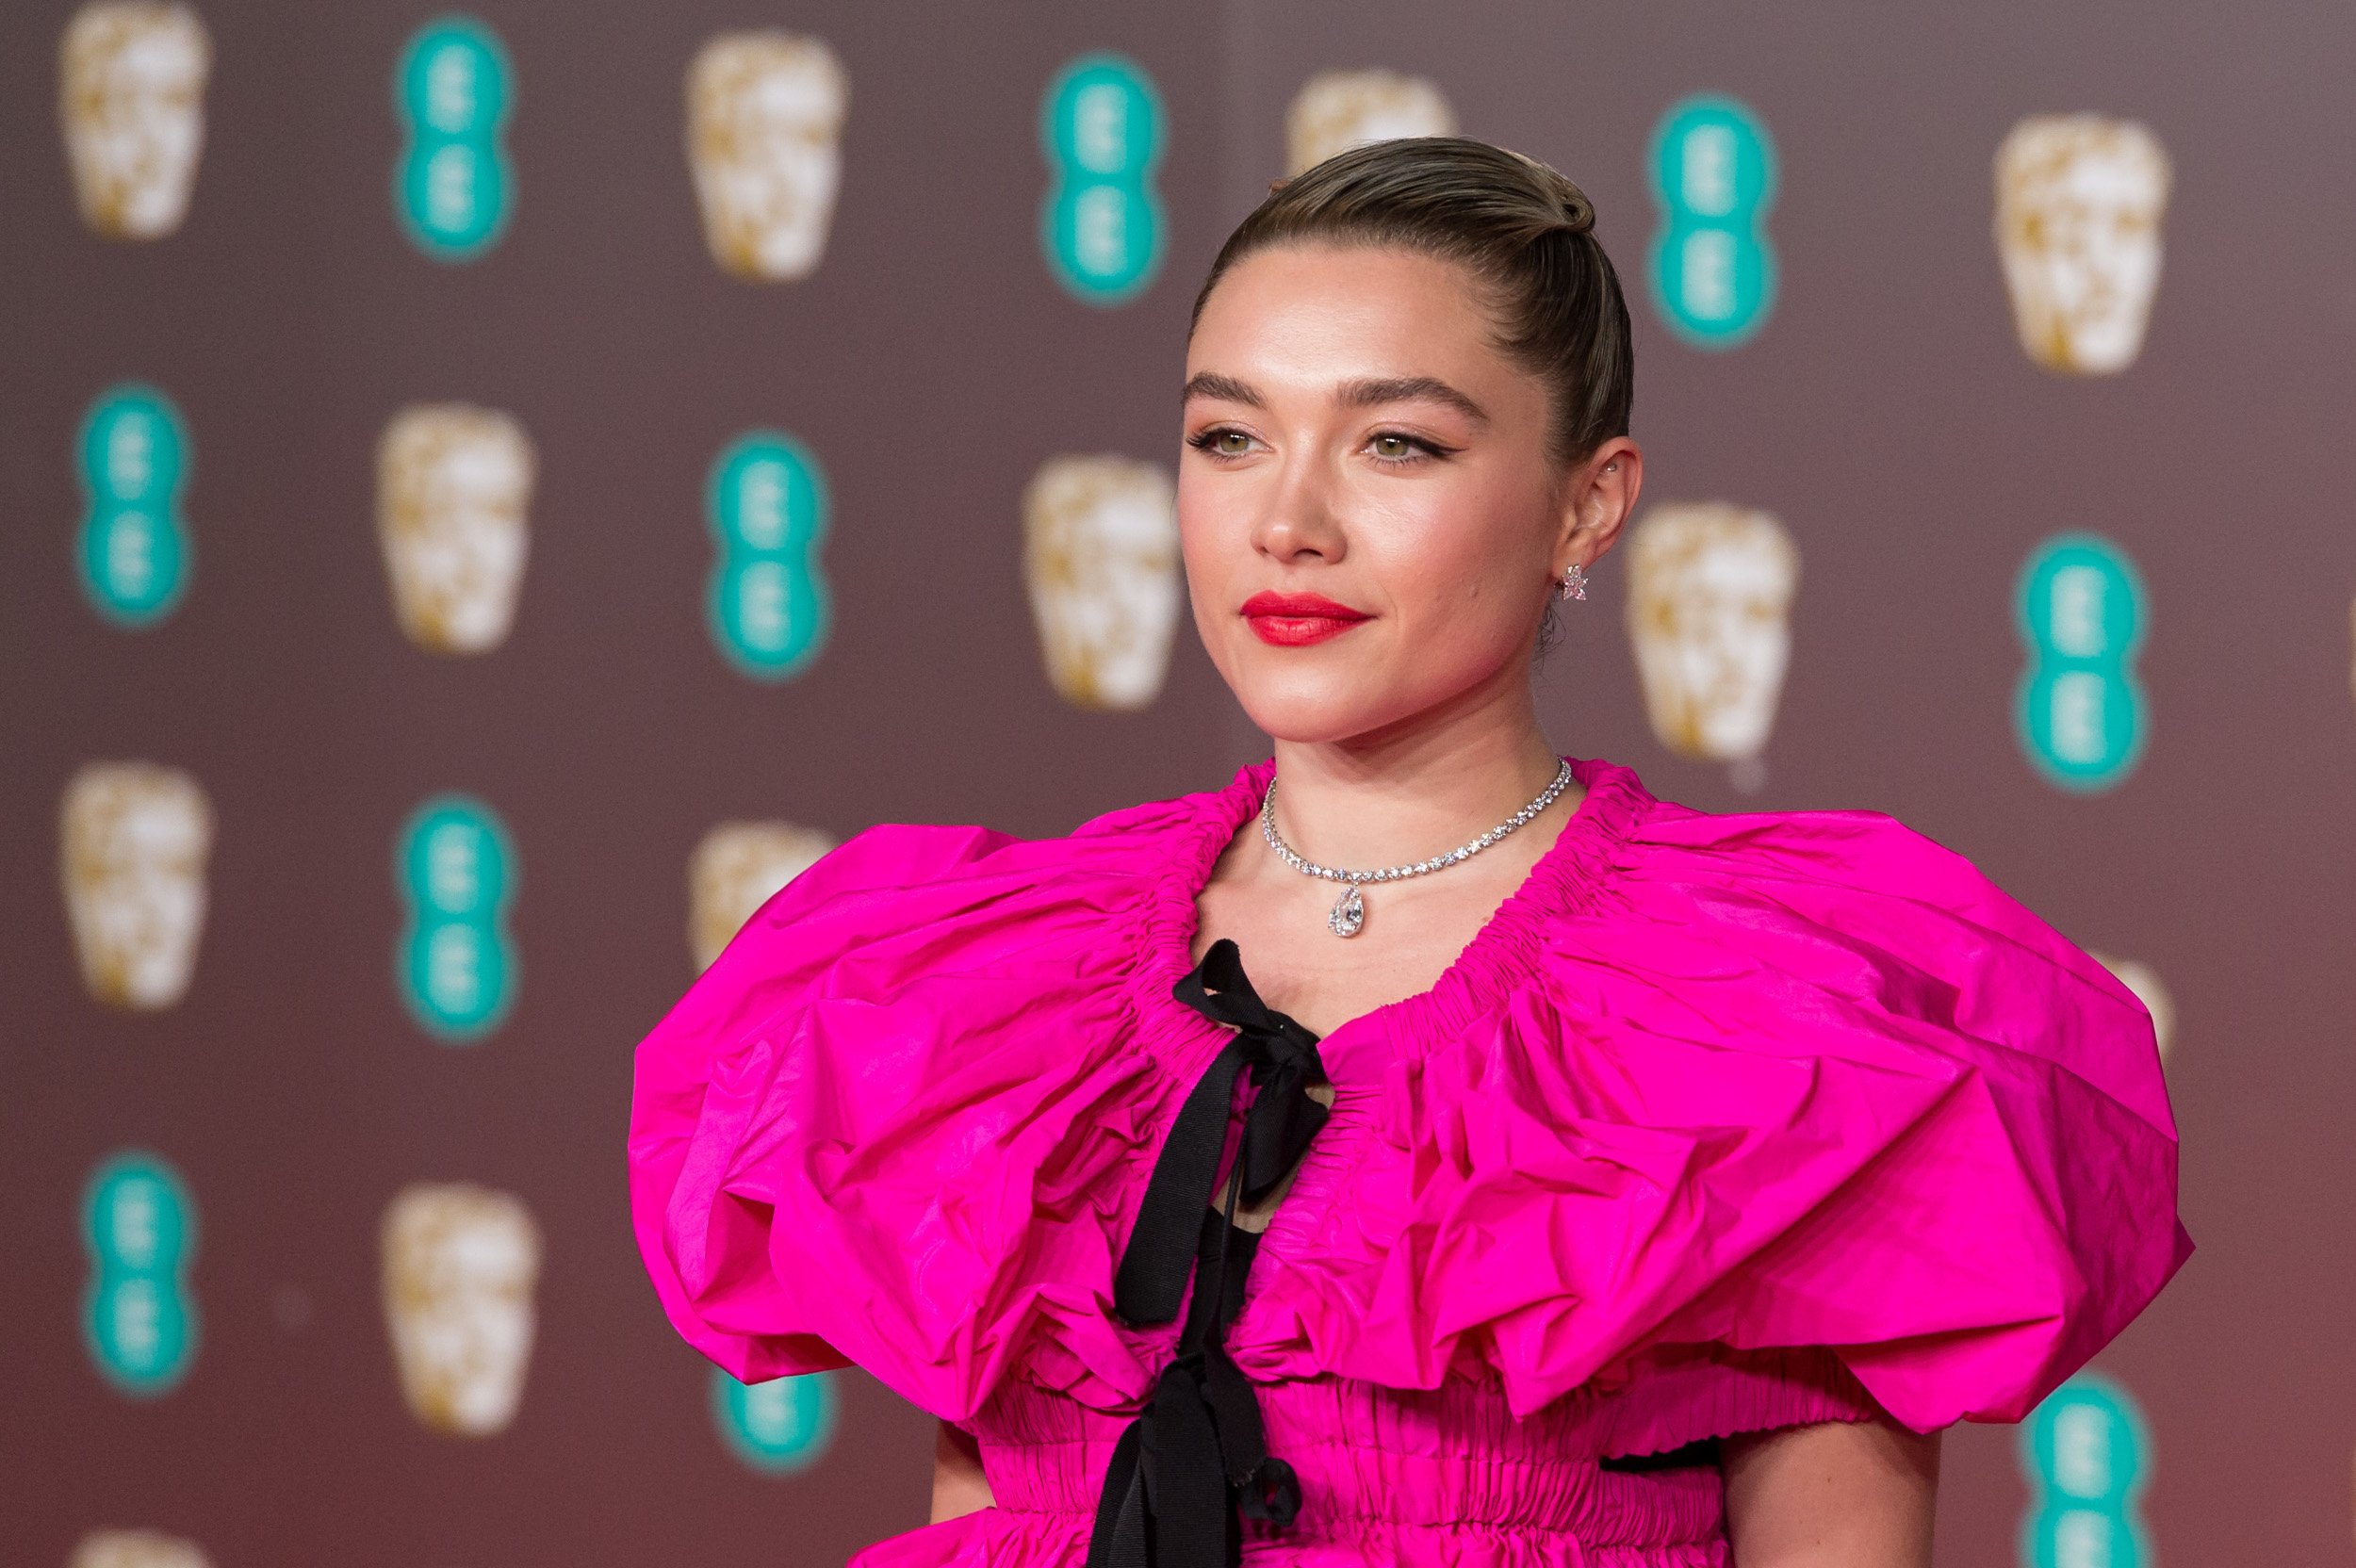 Florence Pugh wearing a pink ruffled dress with her hair tied back